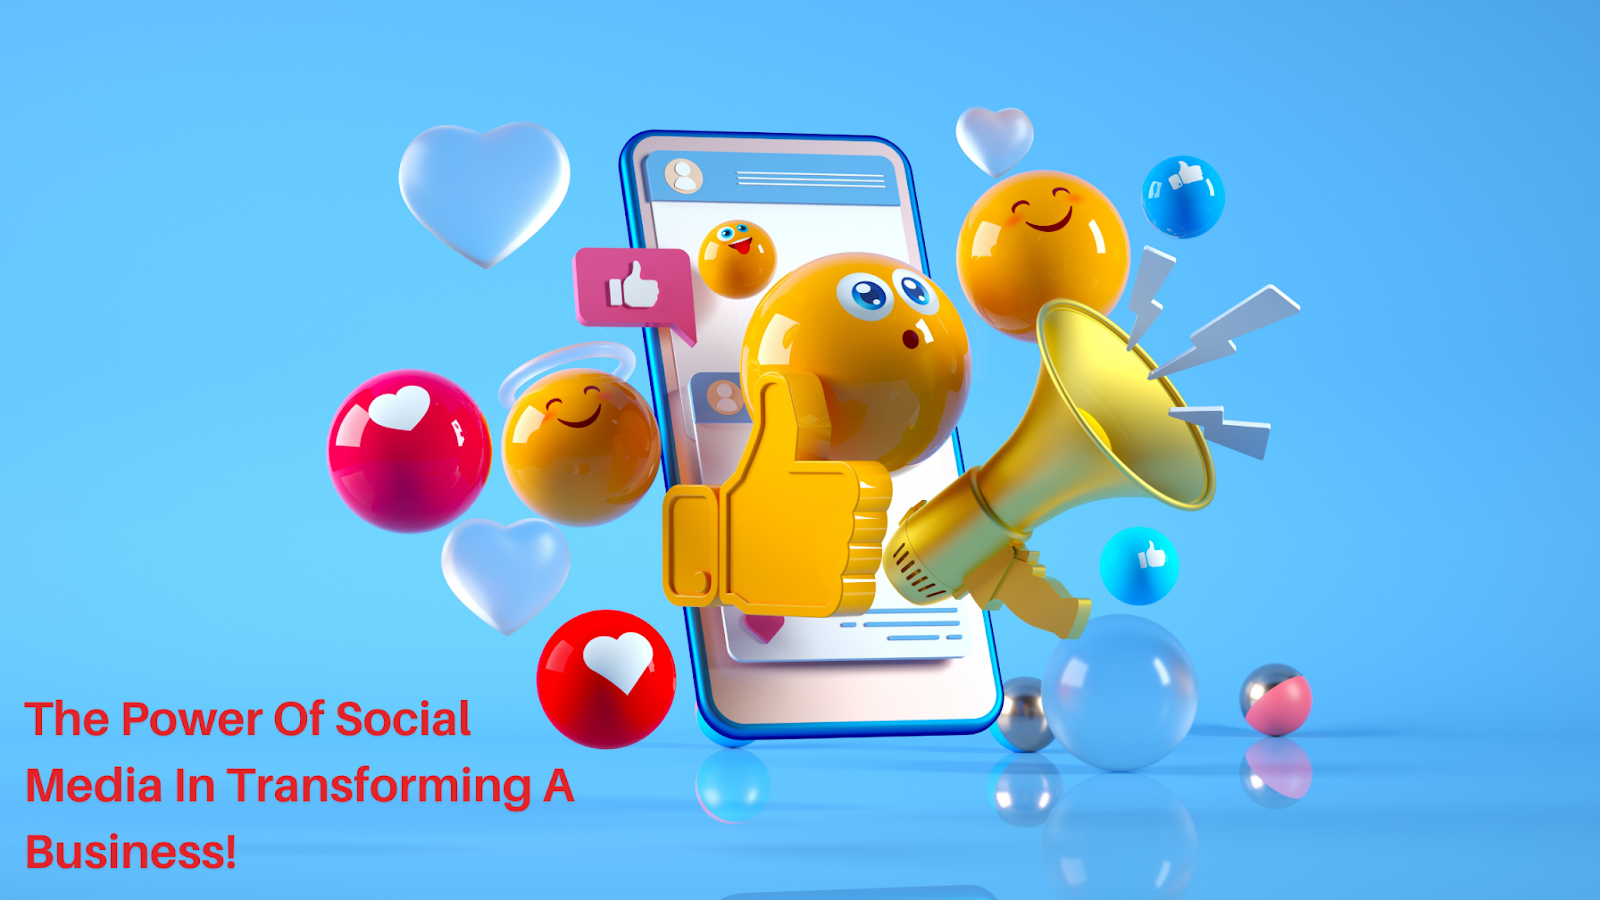 The Power of Social Media In Transforming A Business!